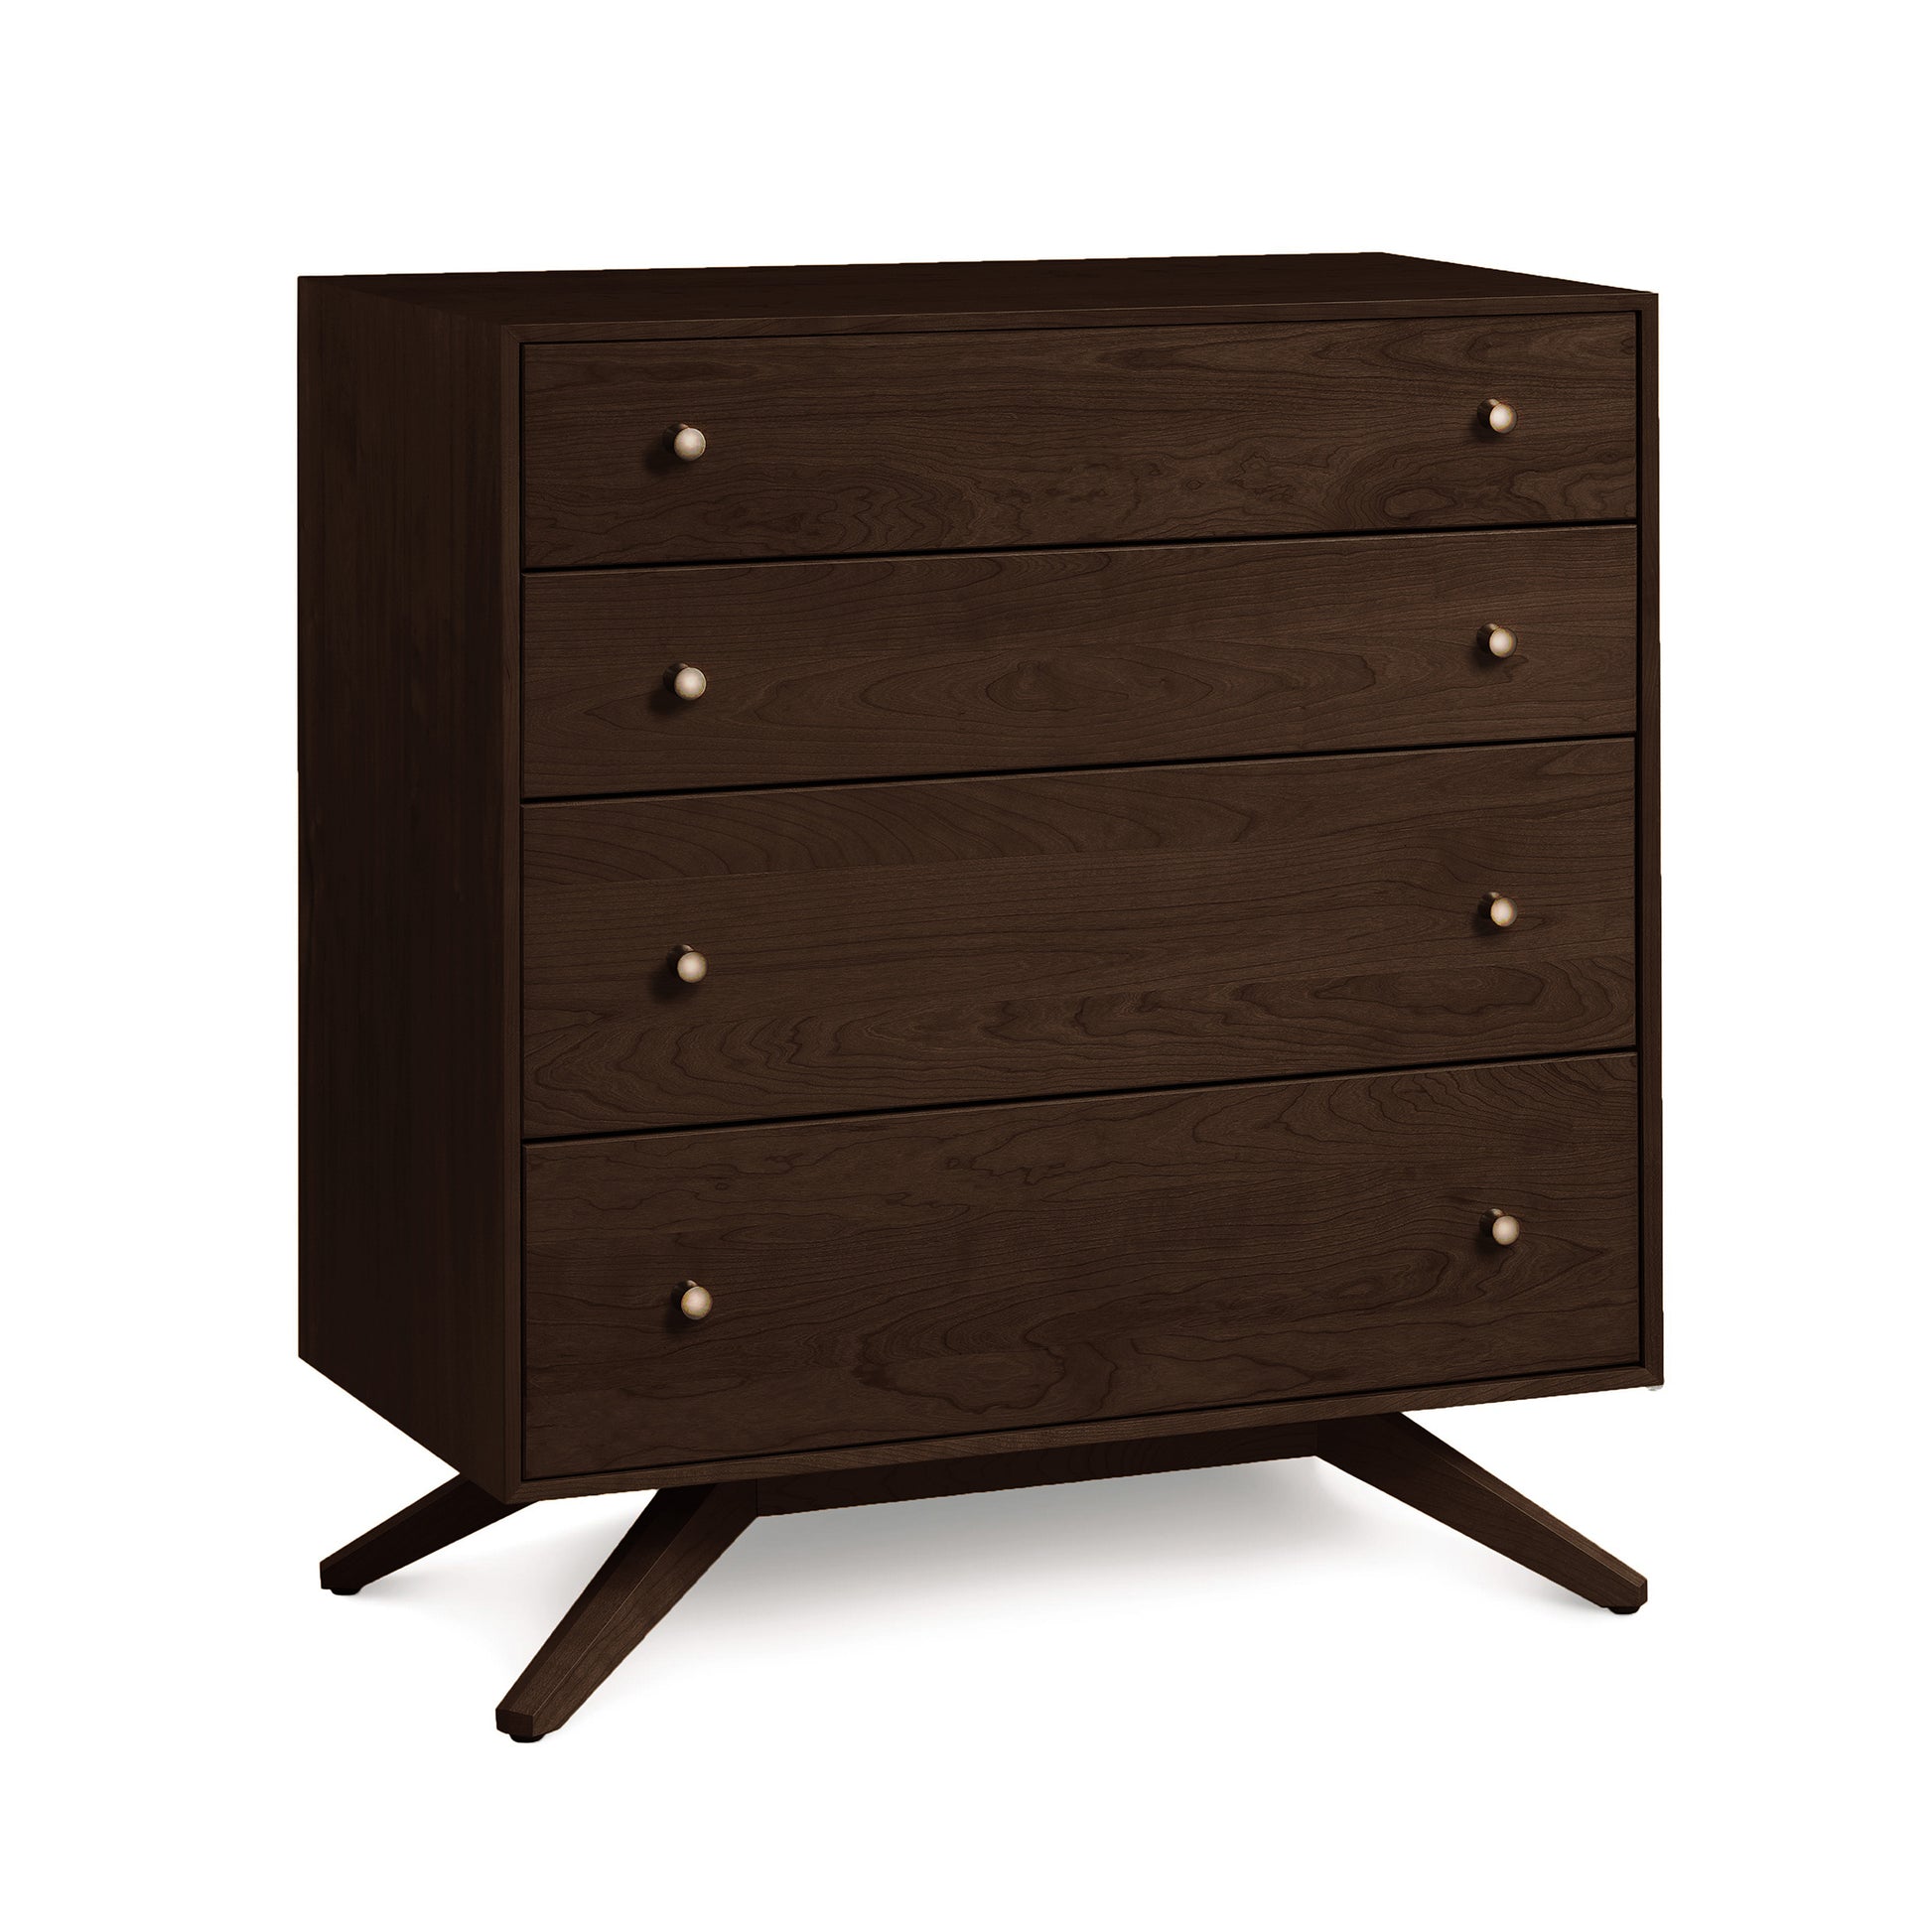 A dark brown hardwood dresser with four drawers and angled legs, named Copeland Furniture's Astrid 4-Drawer Chest.